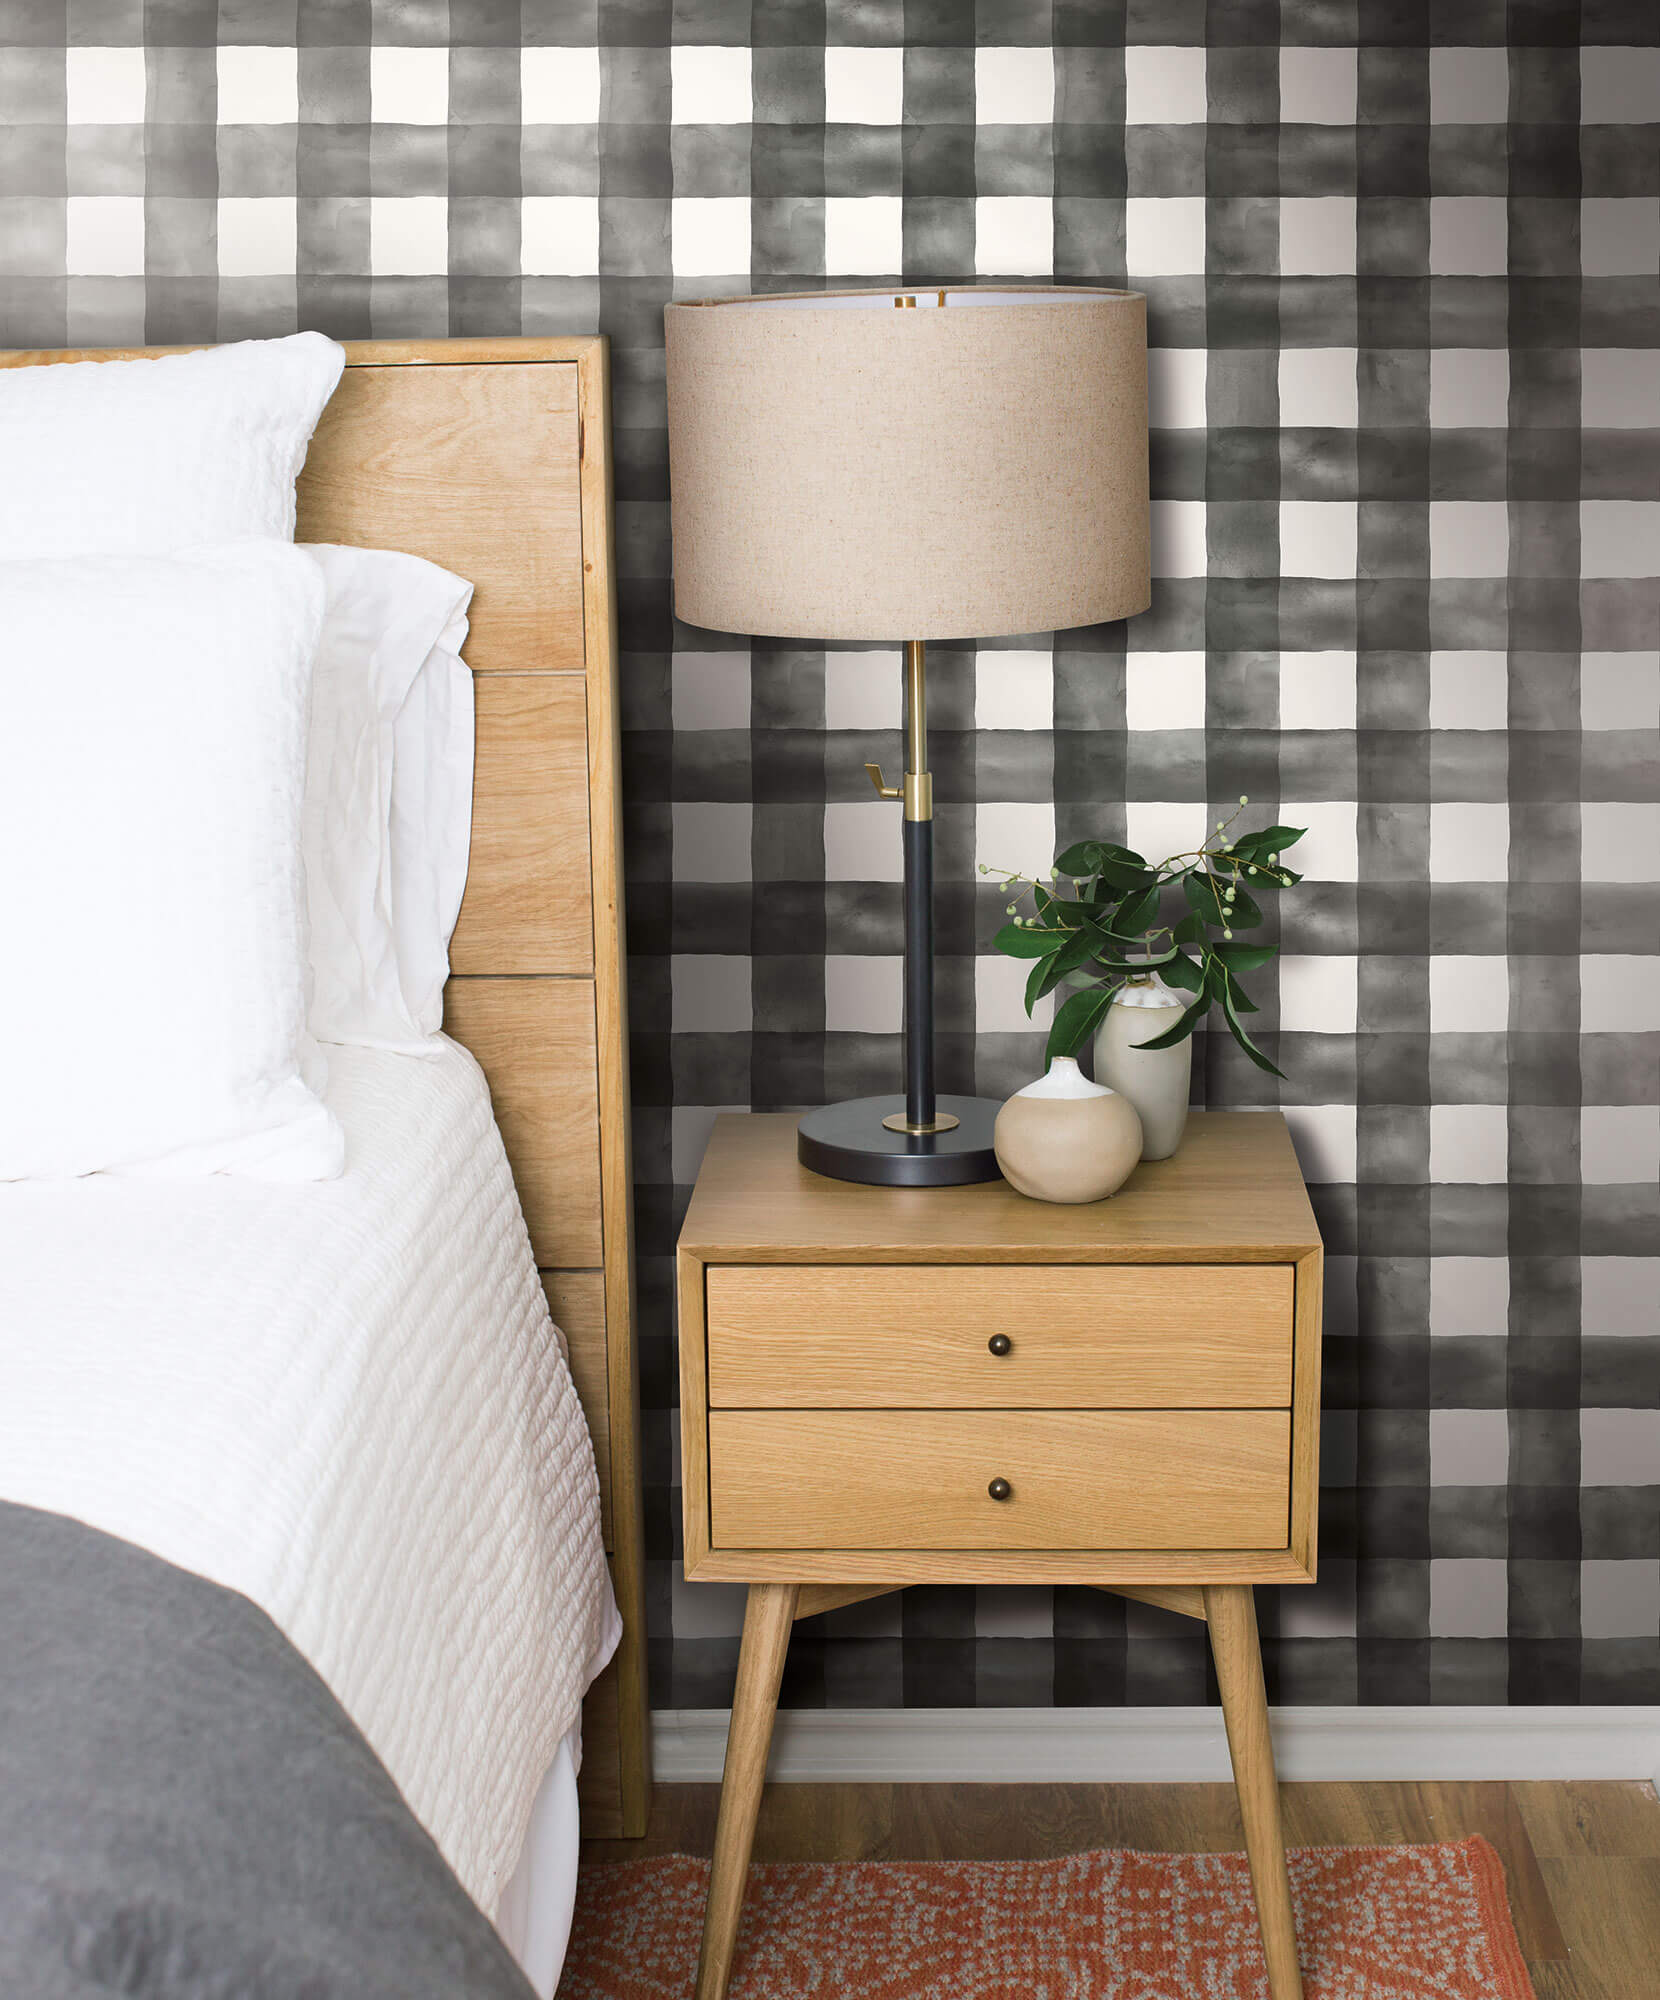 15 Best Wallpapers to Revamp Your Walls in 2023